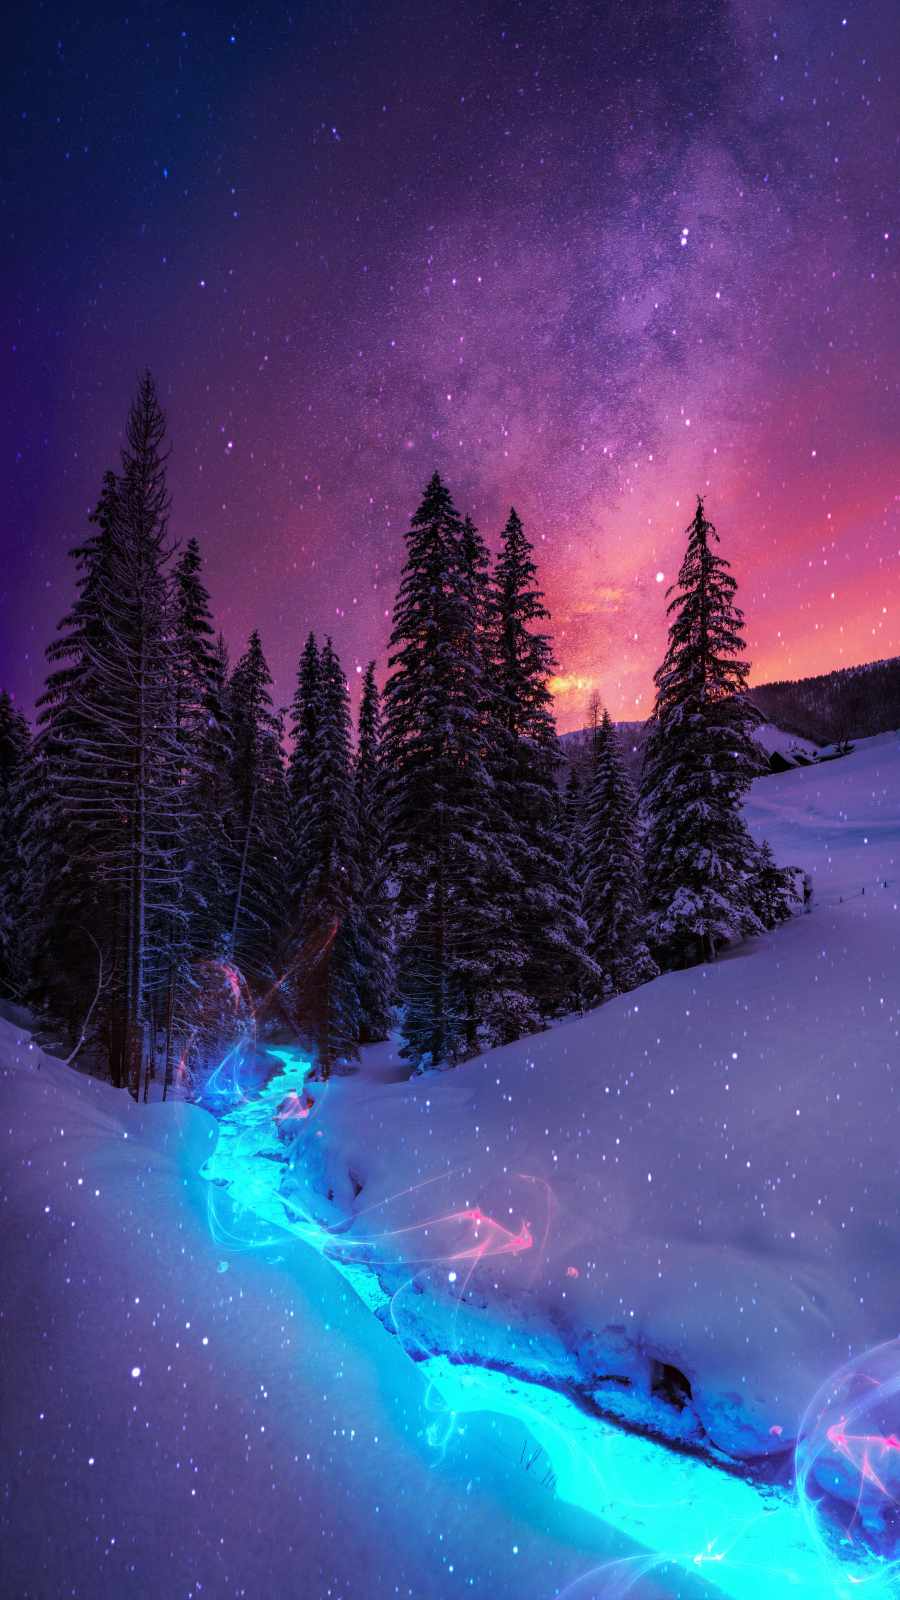 Magical Winter Forest IPhone Wallpaper Wallpaper, iPhone Wallpaper. Beautiful landscape wallpaper, Scenery wallpaper, iPhone wallpaper winter